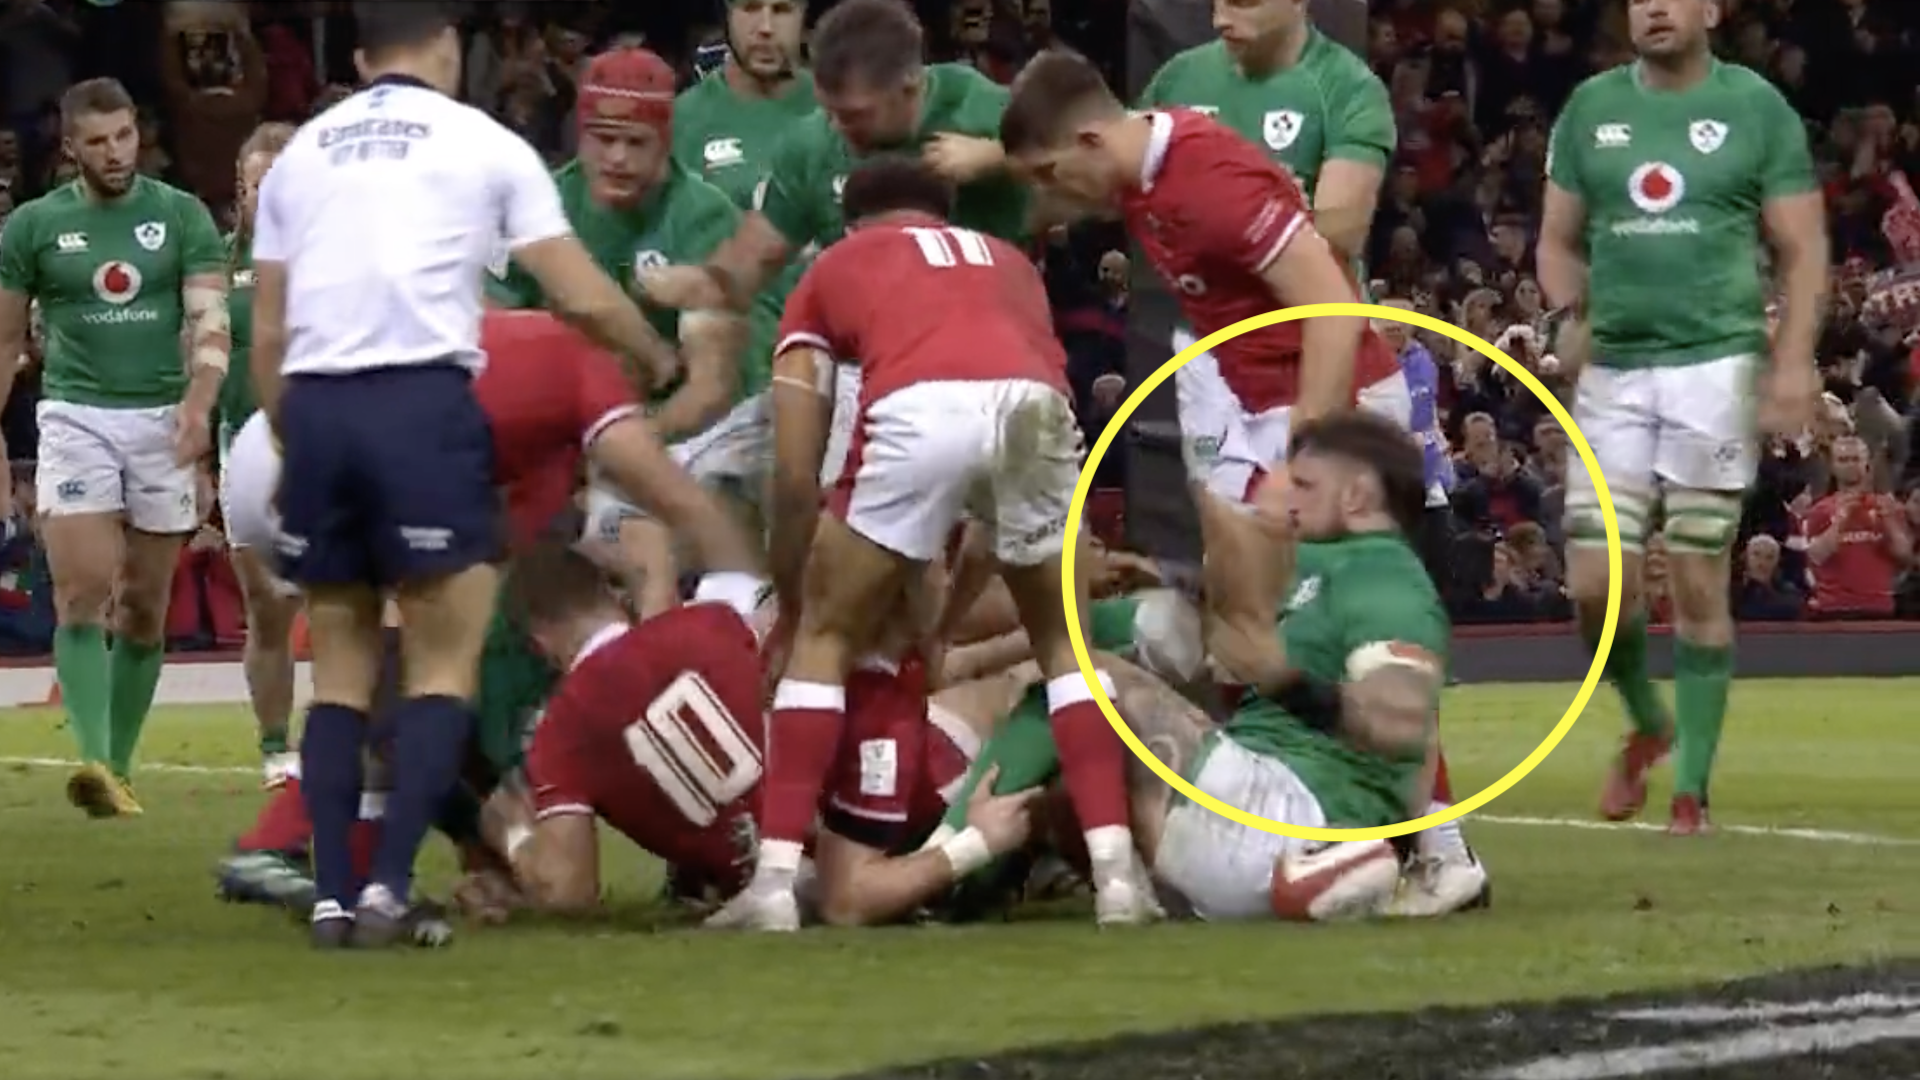 Cheap shot from Ireland loosehead triggers all-out brawl